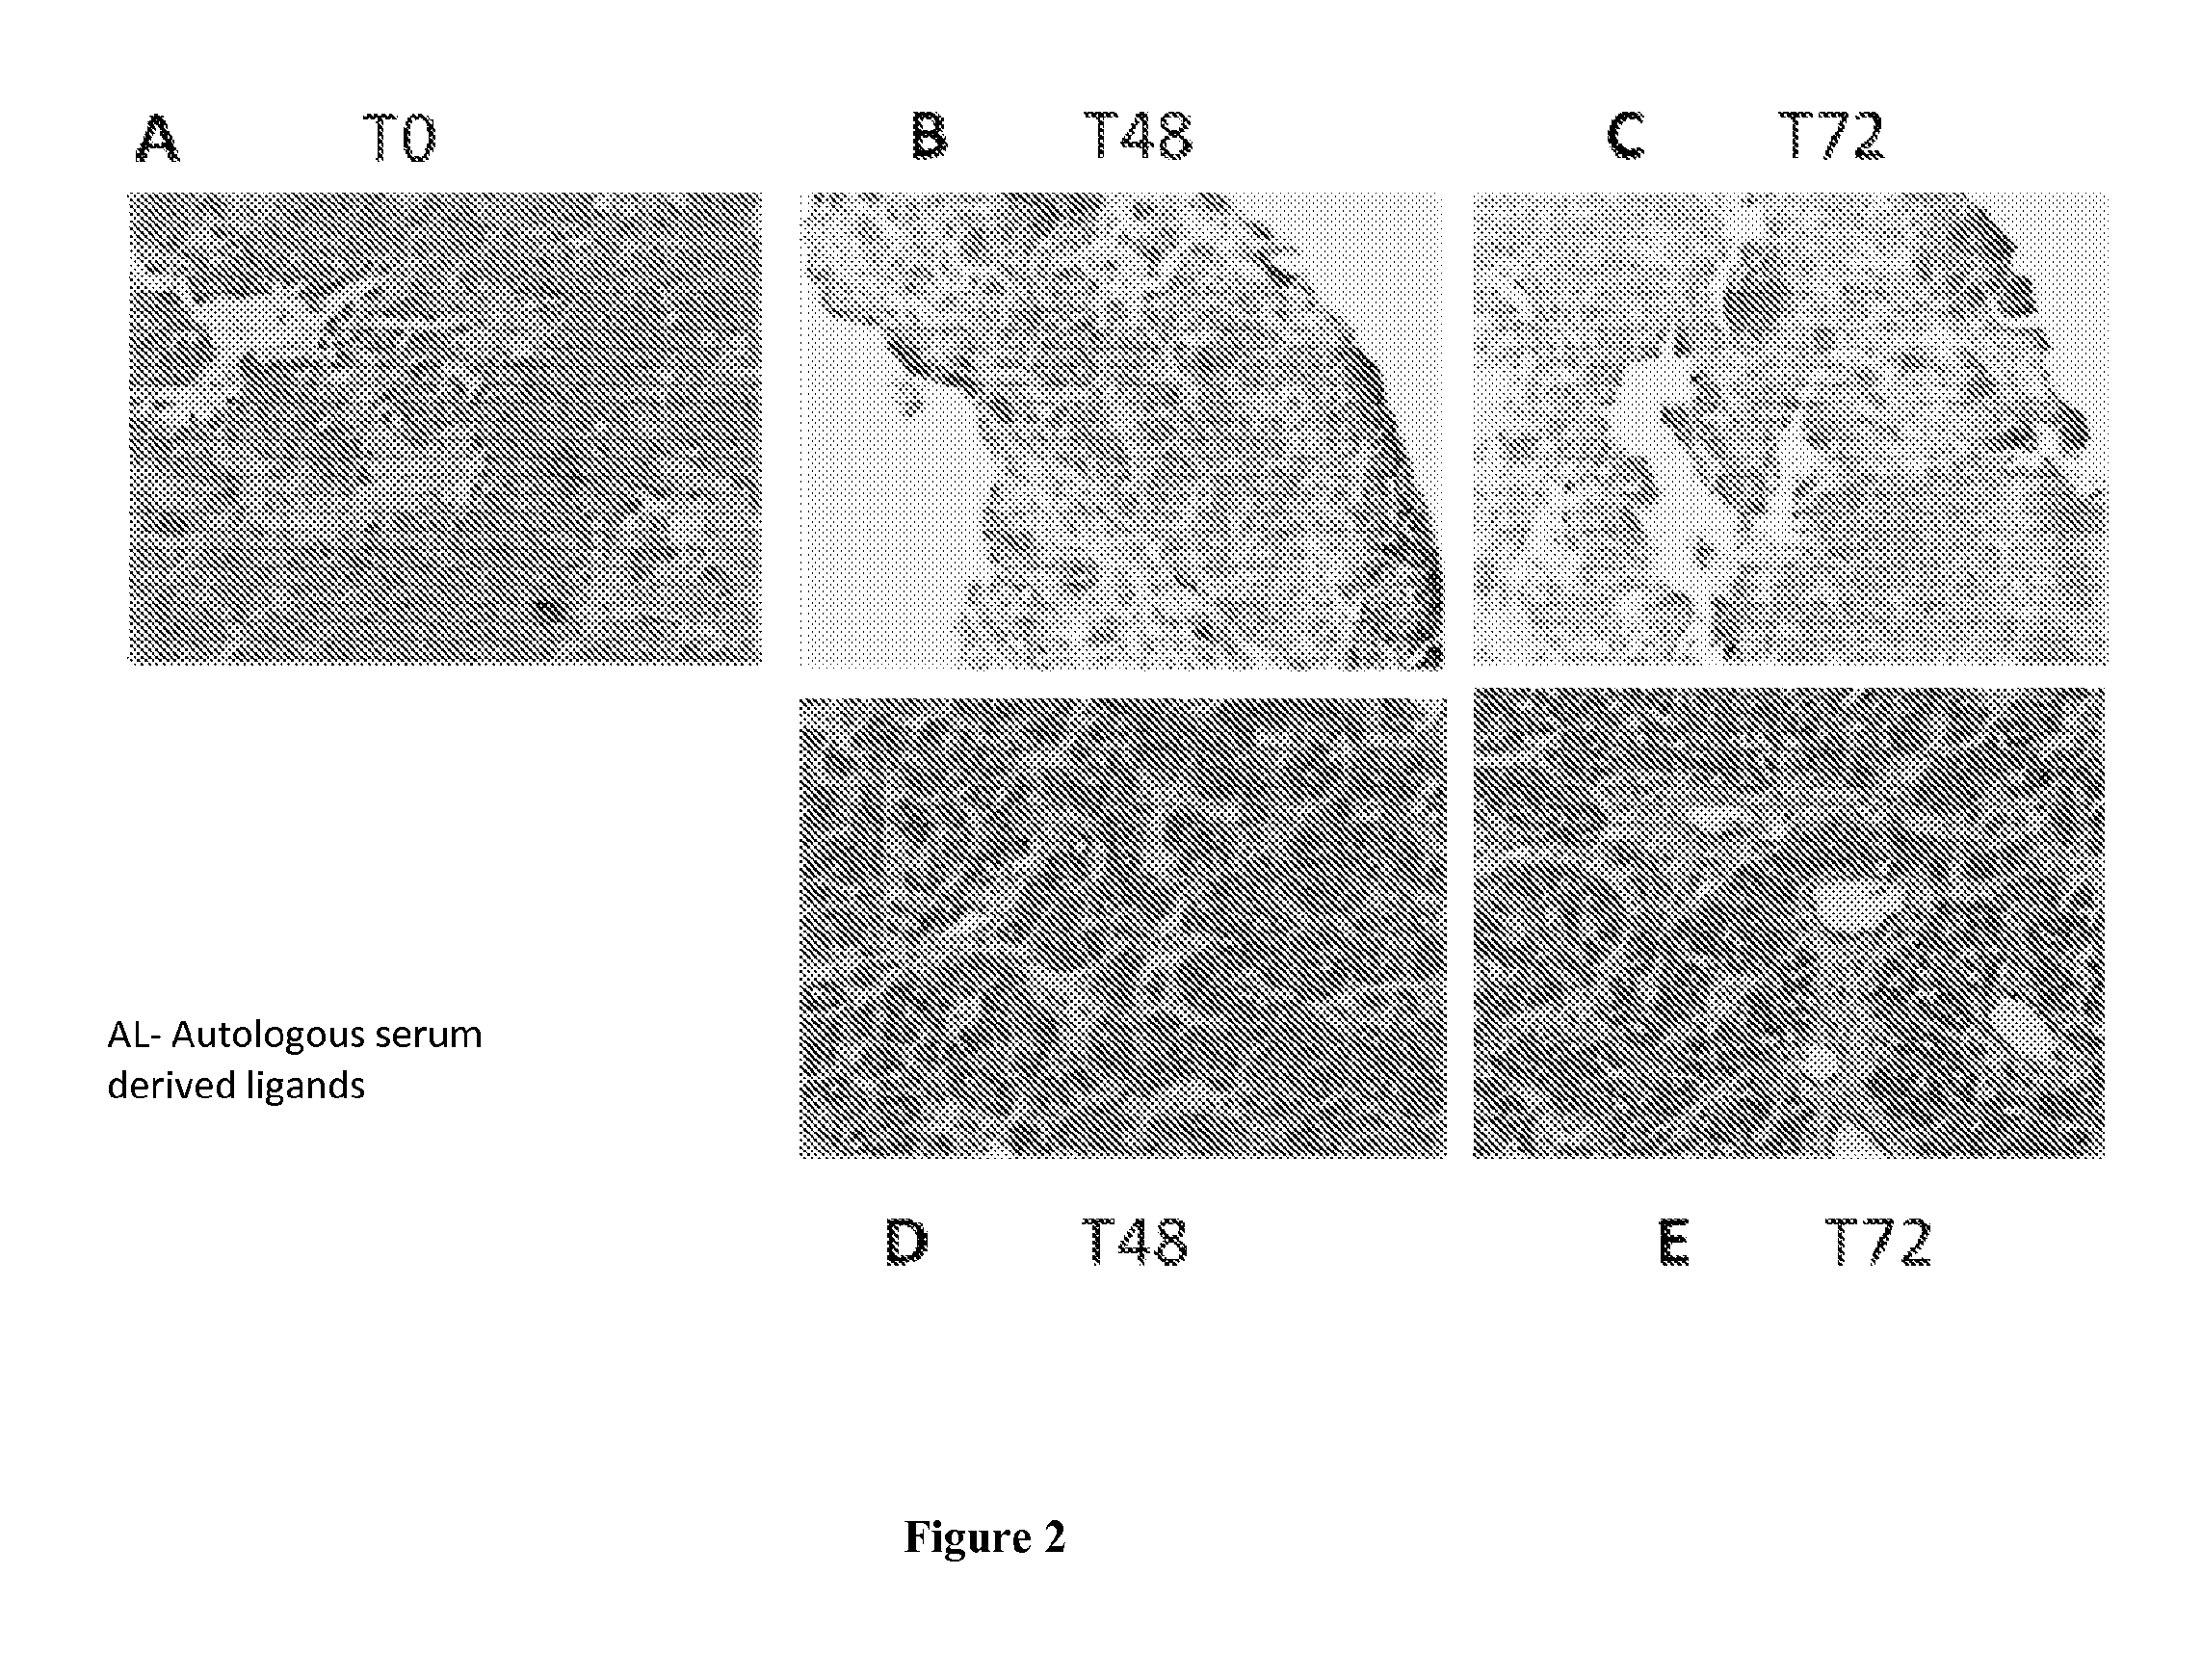 Ecm composition, tumor microenvironment platform and methods thereof